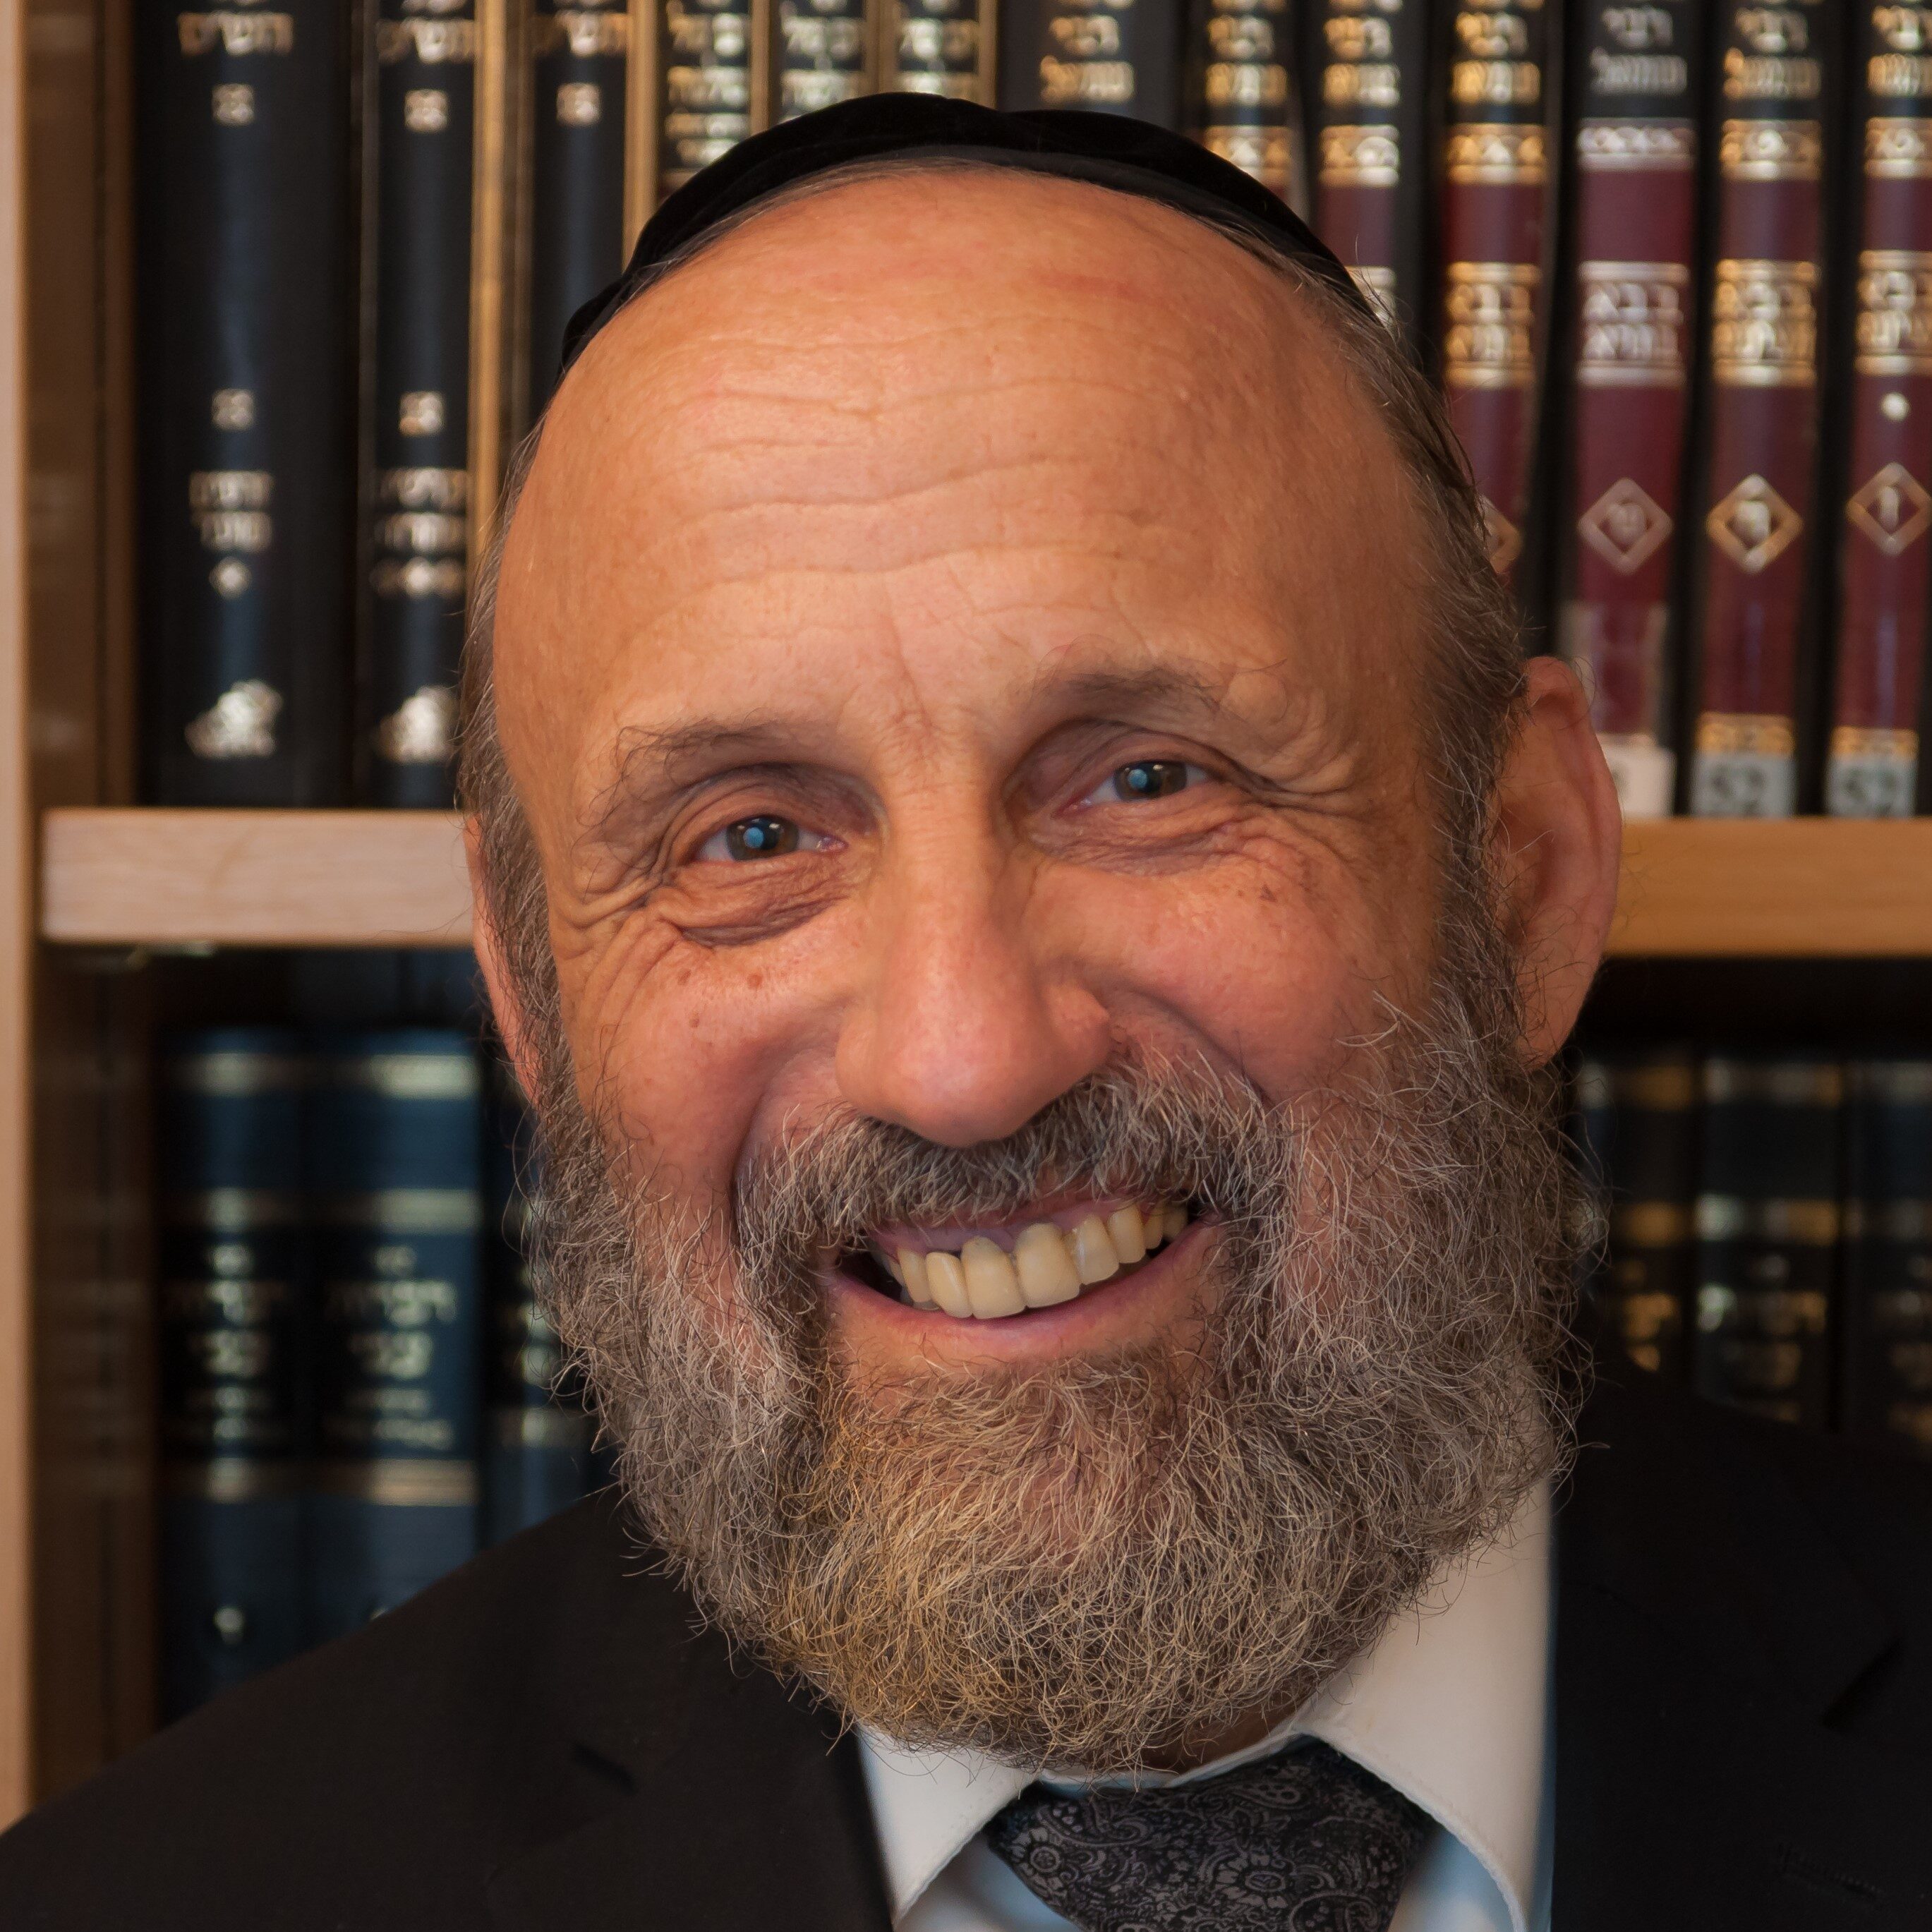 <p>Rabbi Moshe Krieger<br>Shoel U'Meishiv</p>
<p>Talmid of<br>Rabbi Reuven Gershonovitz.<br>He learned at Brisk<br> and theTelzstone Kollel.<br>He has published<br>books on the Parsha.</p>